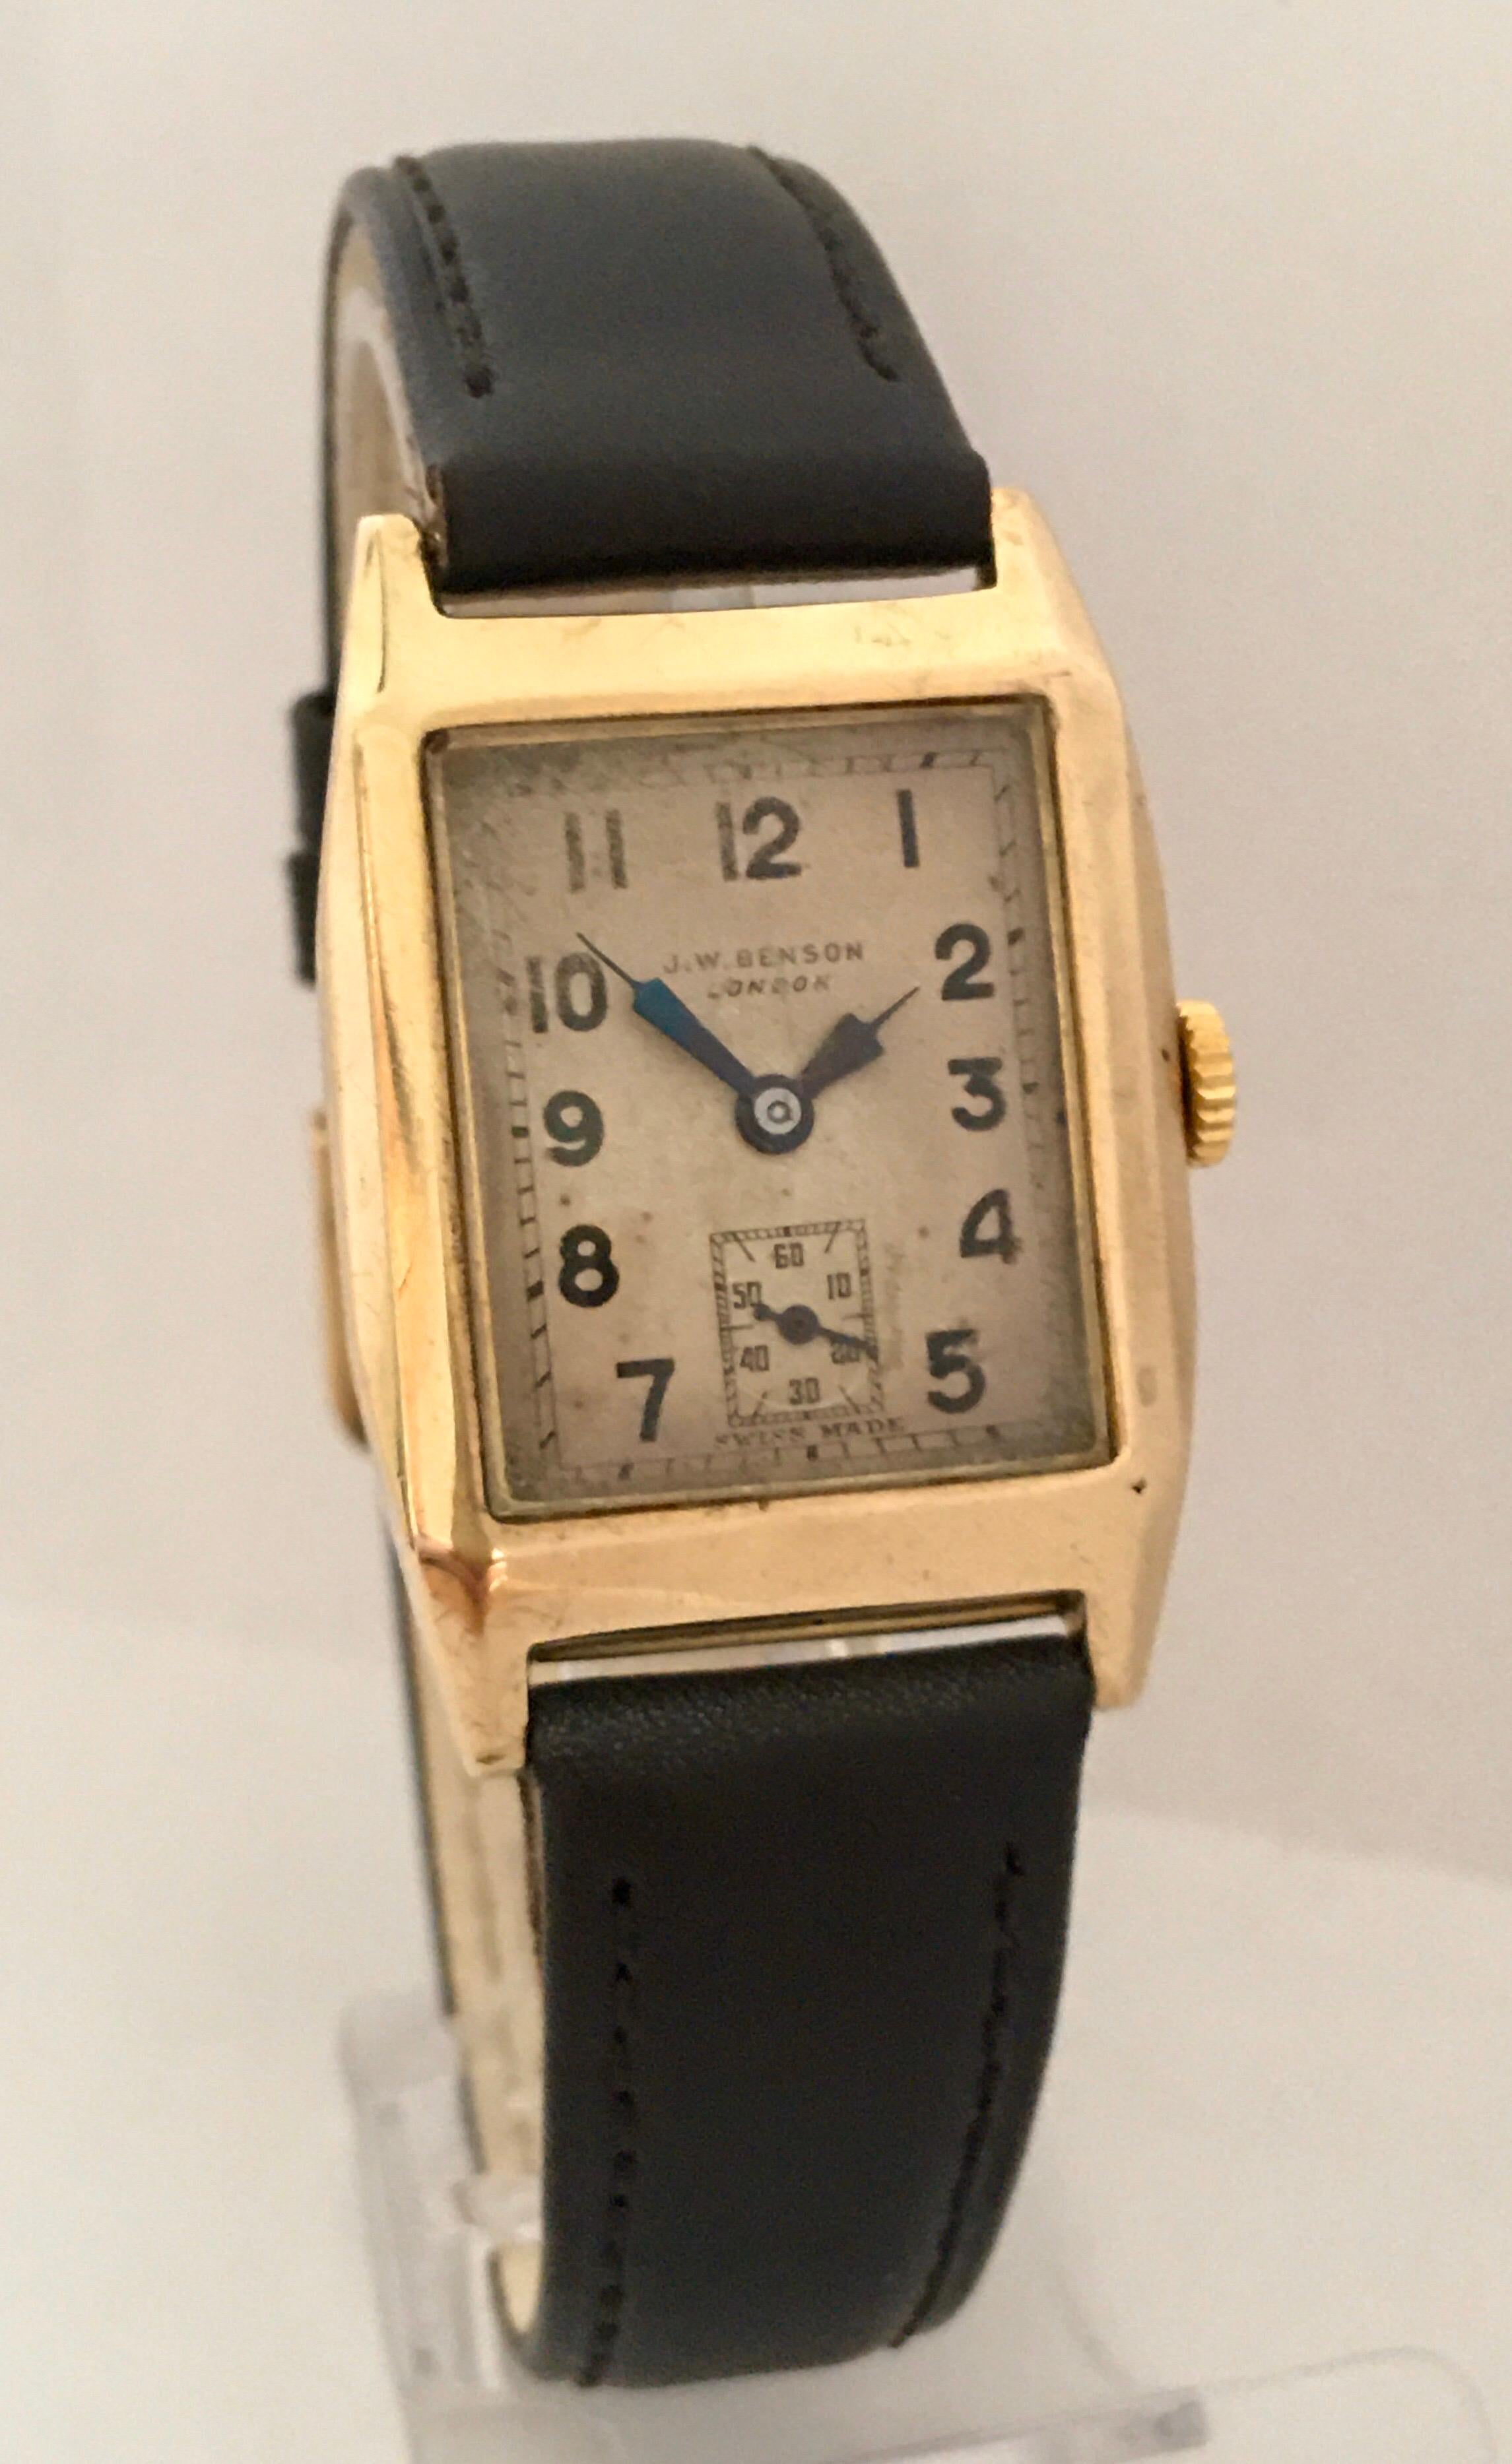 This beautiful pre-owned 1930’s vintage Gold Manual winding watch is in good working condition and it runs well. Visible signs of wear and ageing. Slight scratches on the glass and watch case as shown. Dial has aged.

Please study the images